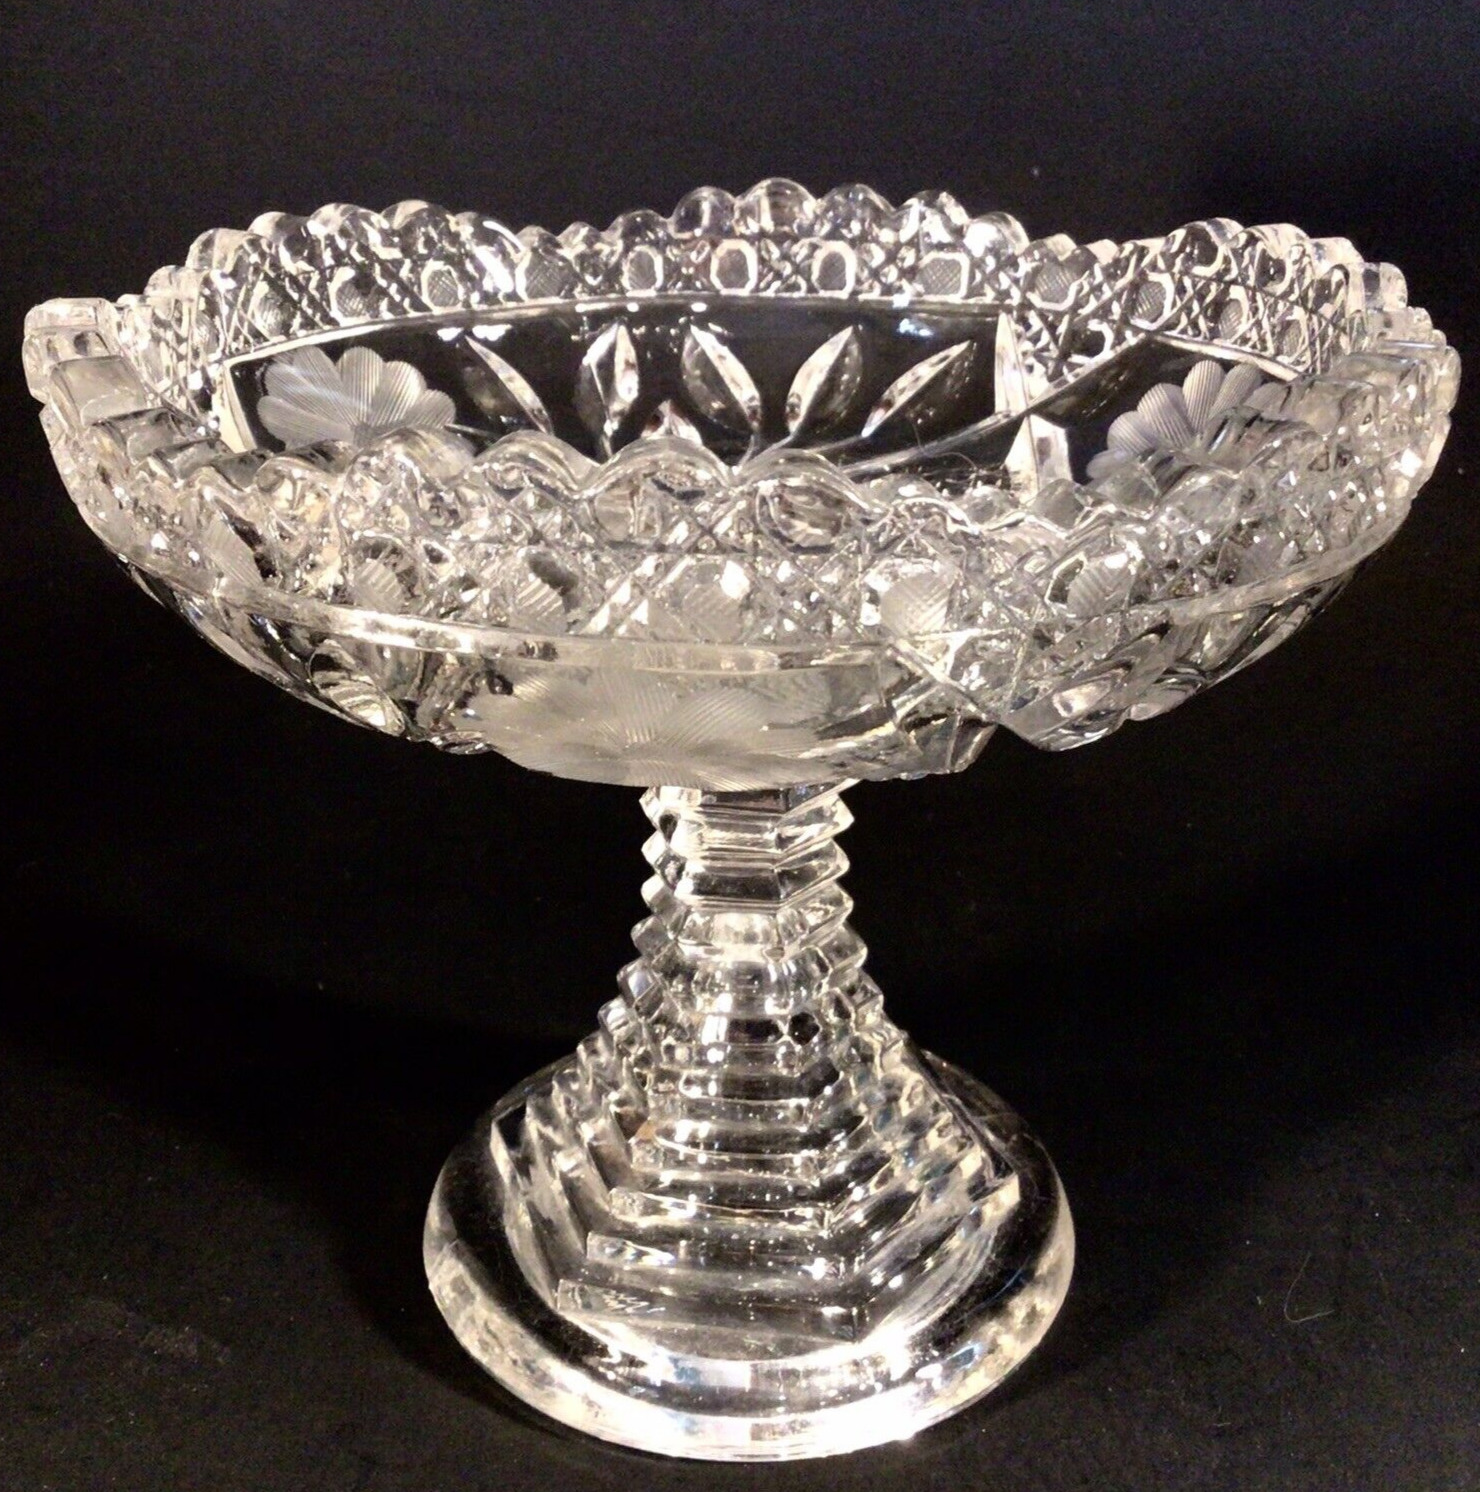 VINTAGE GLASS COMPOTE DECORATIVE CANDY DISH DAISIES SAWTOOTH EDGE